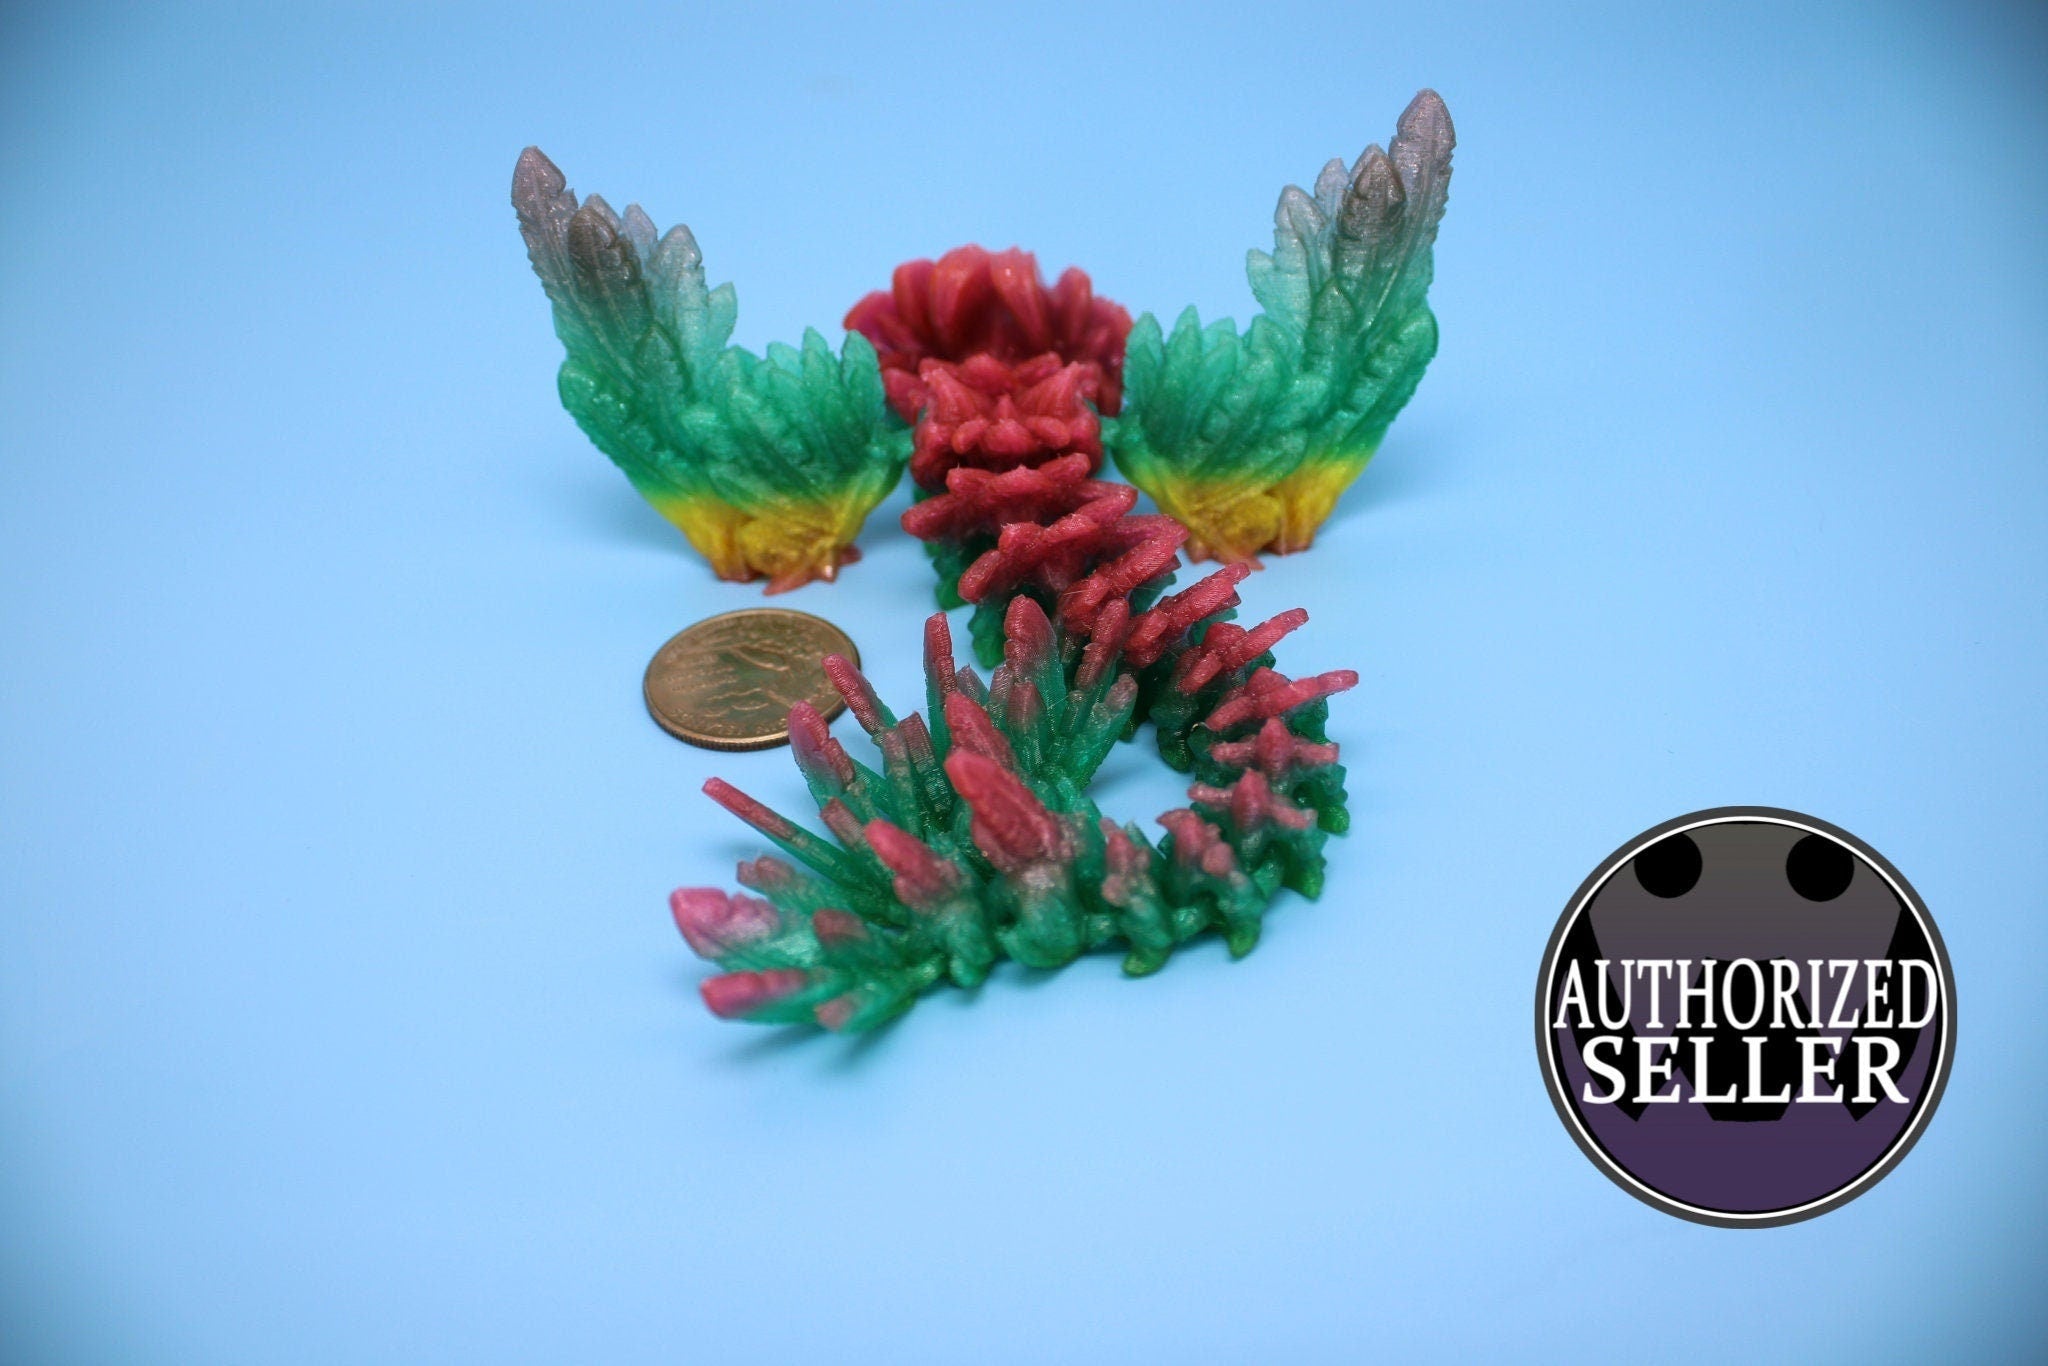 Flexible Miniature Baby Flying Serpent Dragon Rainbow 3D printed articulating Toy Fidget Flexi Toy 7 in. head to tail Stress Relief Gift